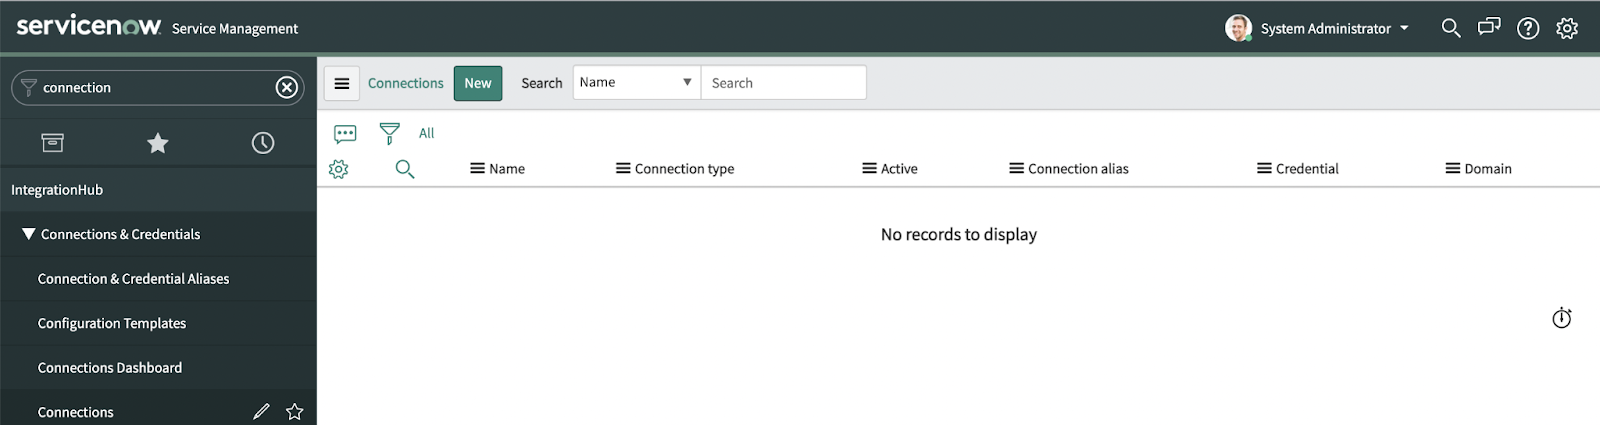 new connection servicenow spoke 